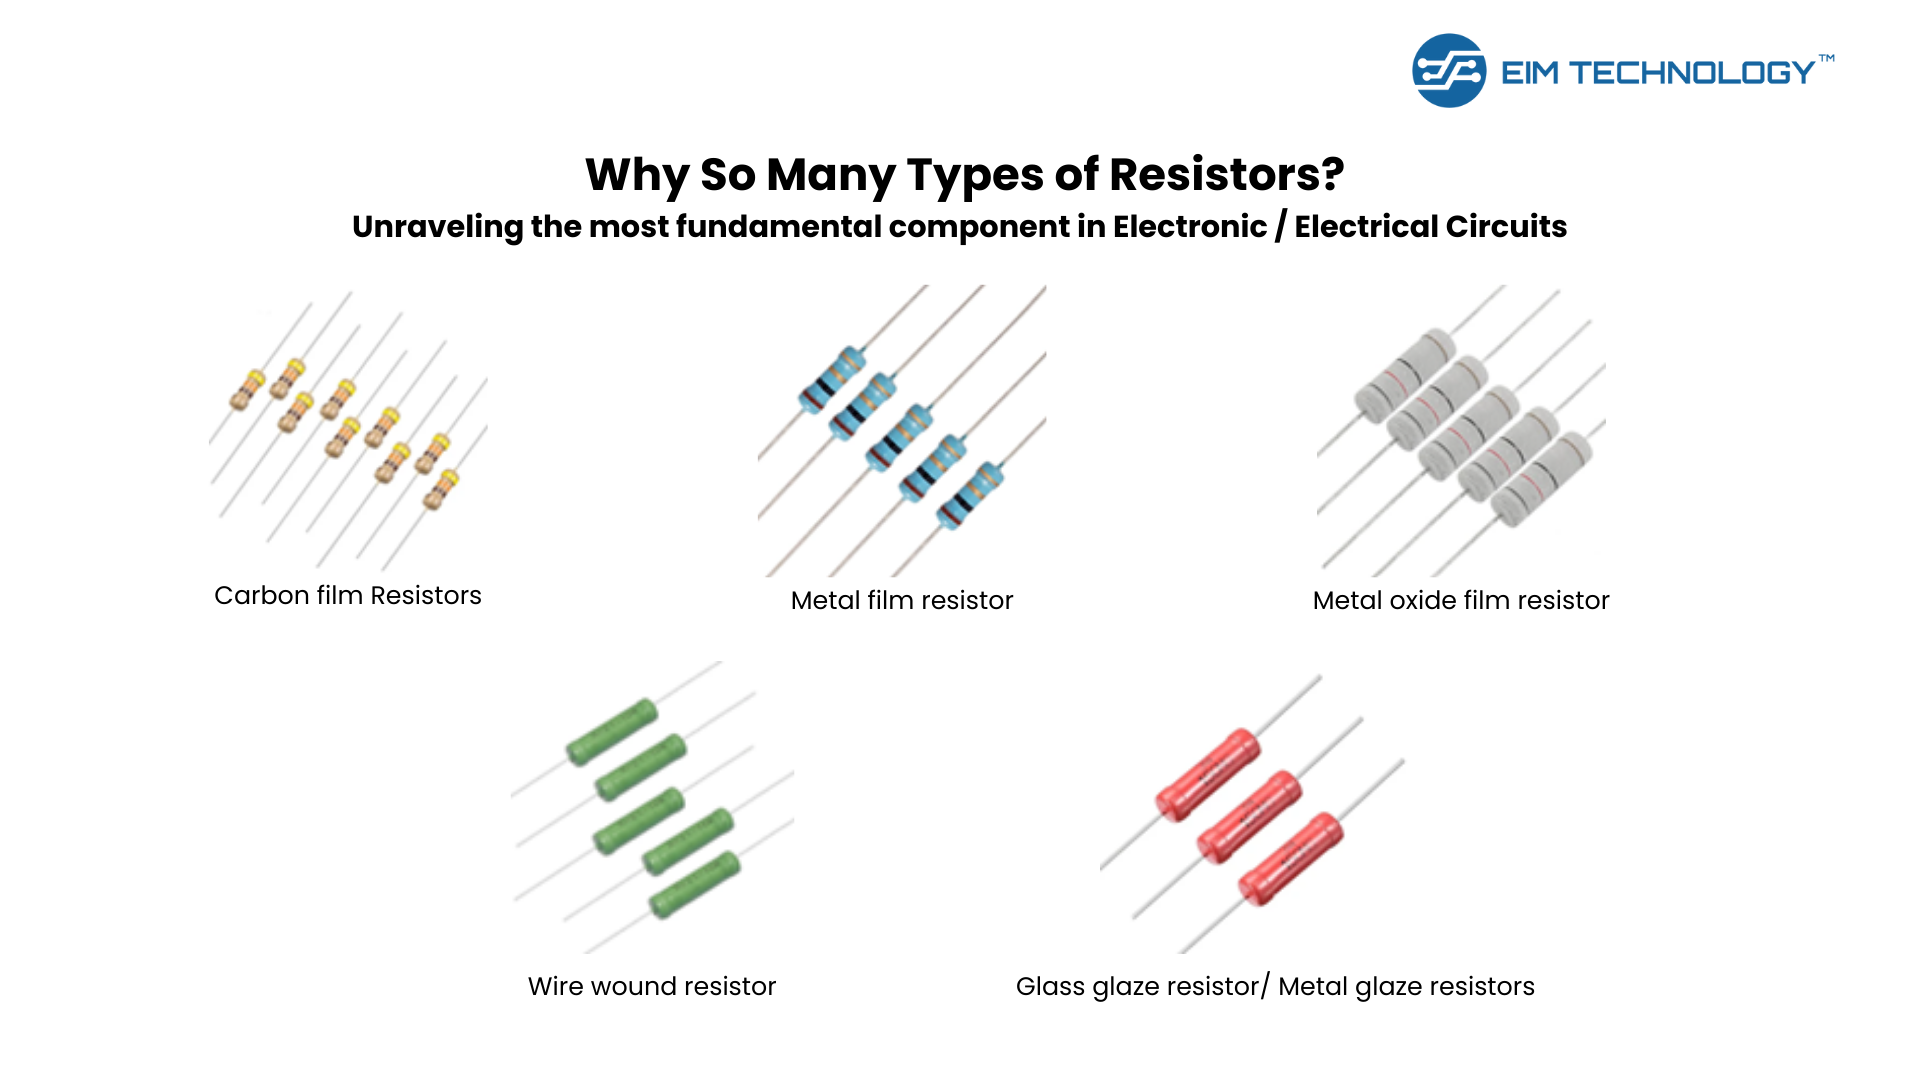 Why So Many types of resistor Resistors? Unraveling the most fundamental component in electronics - Part II